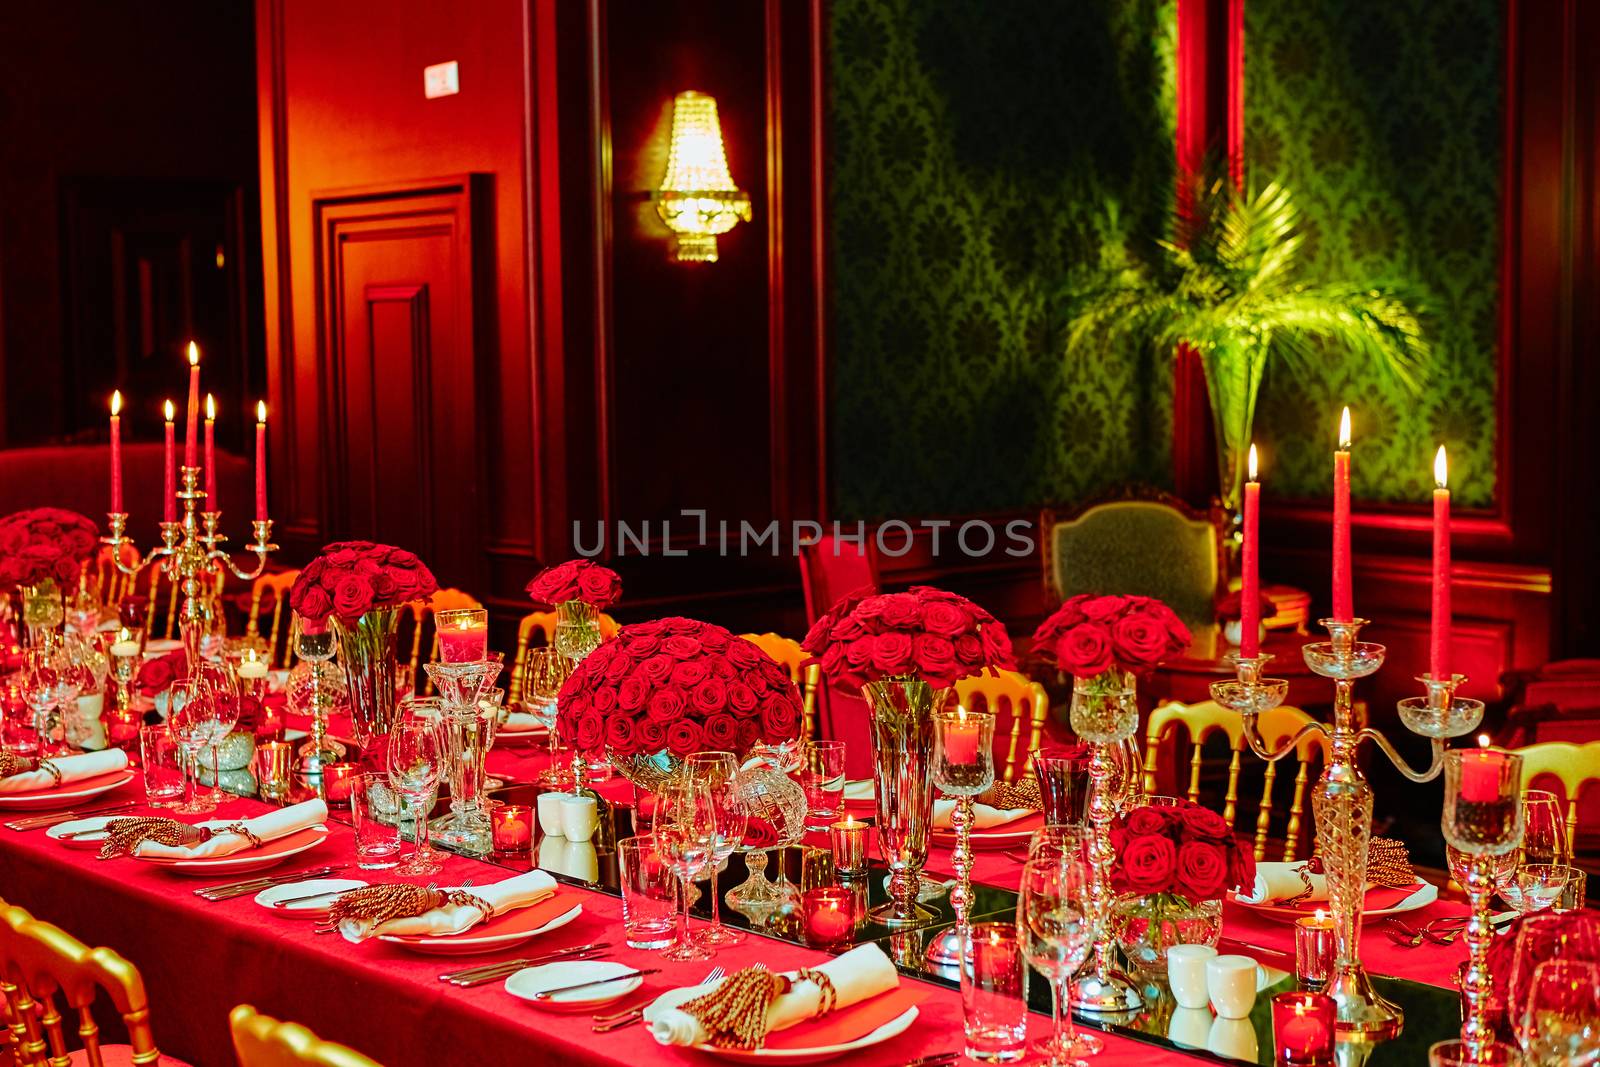 Table set for wedding or another catered event dinner in red colors